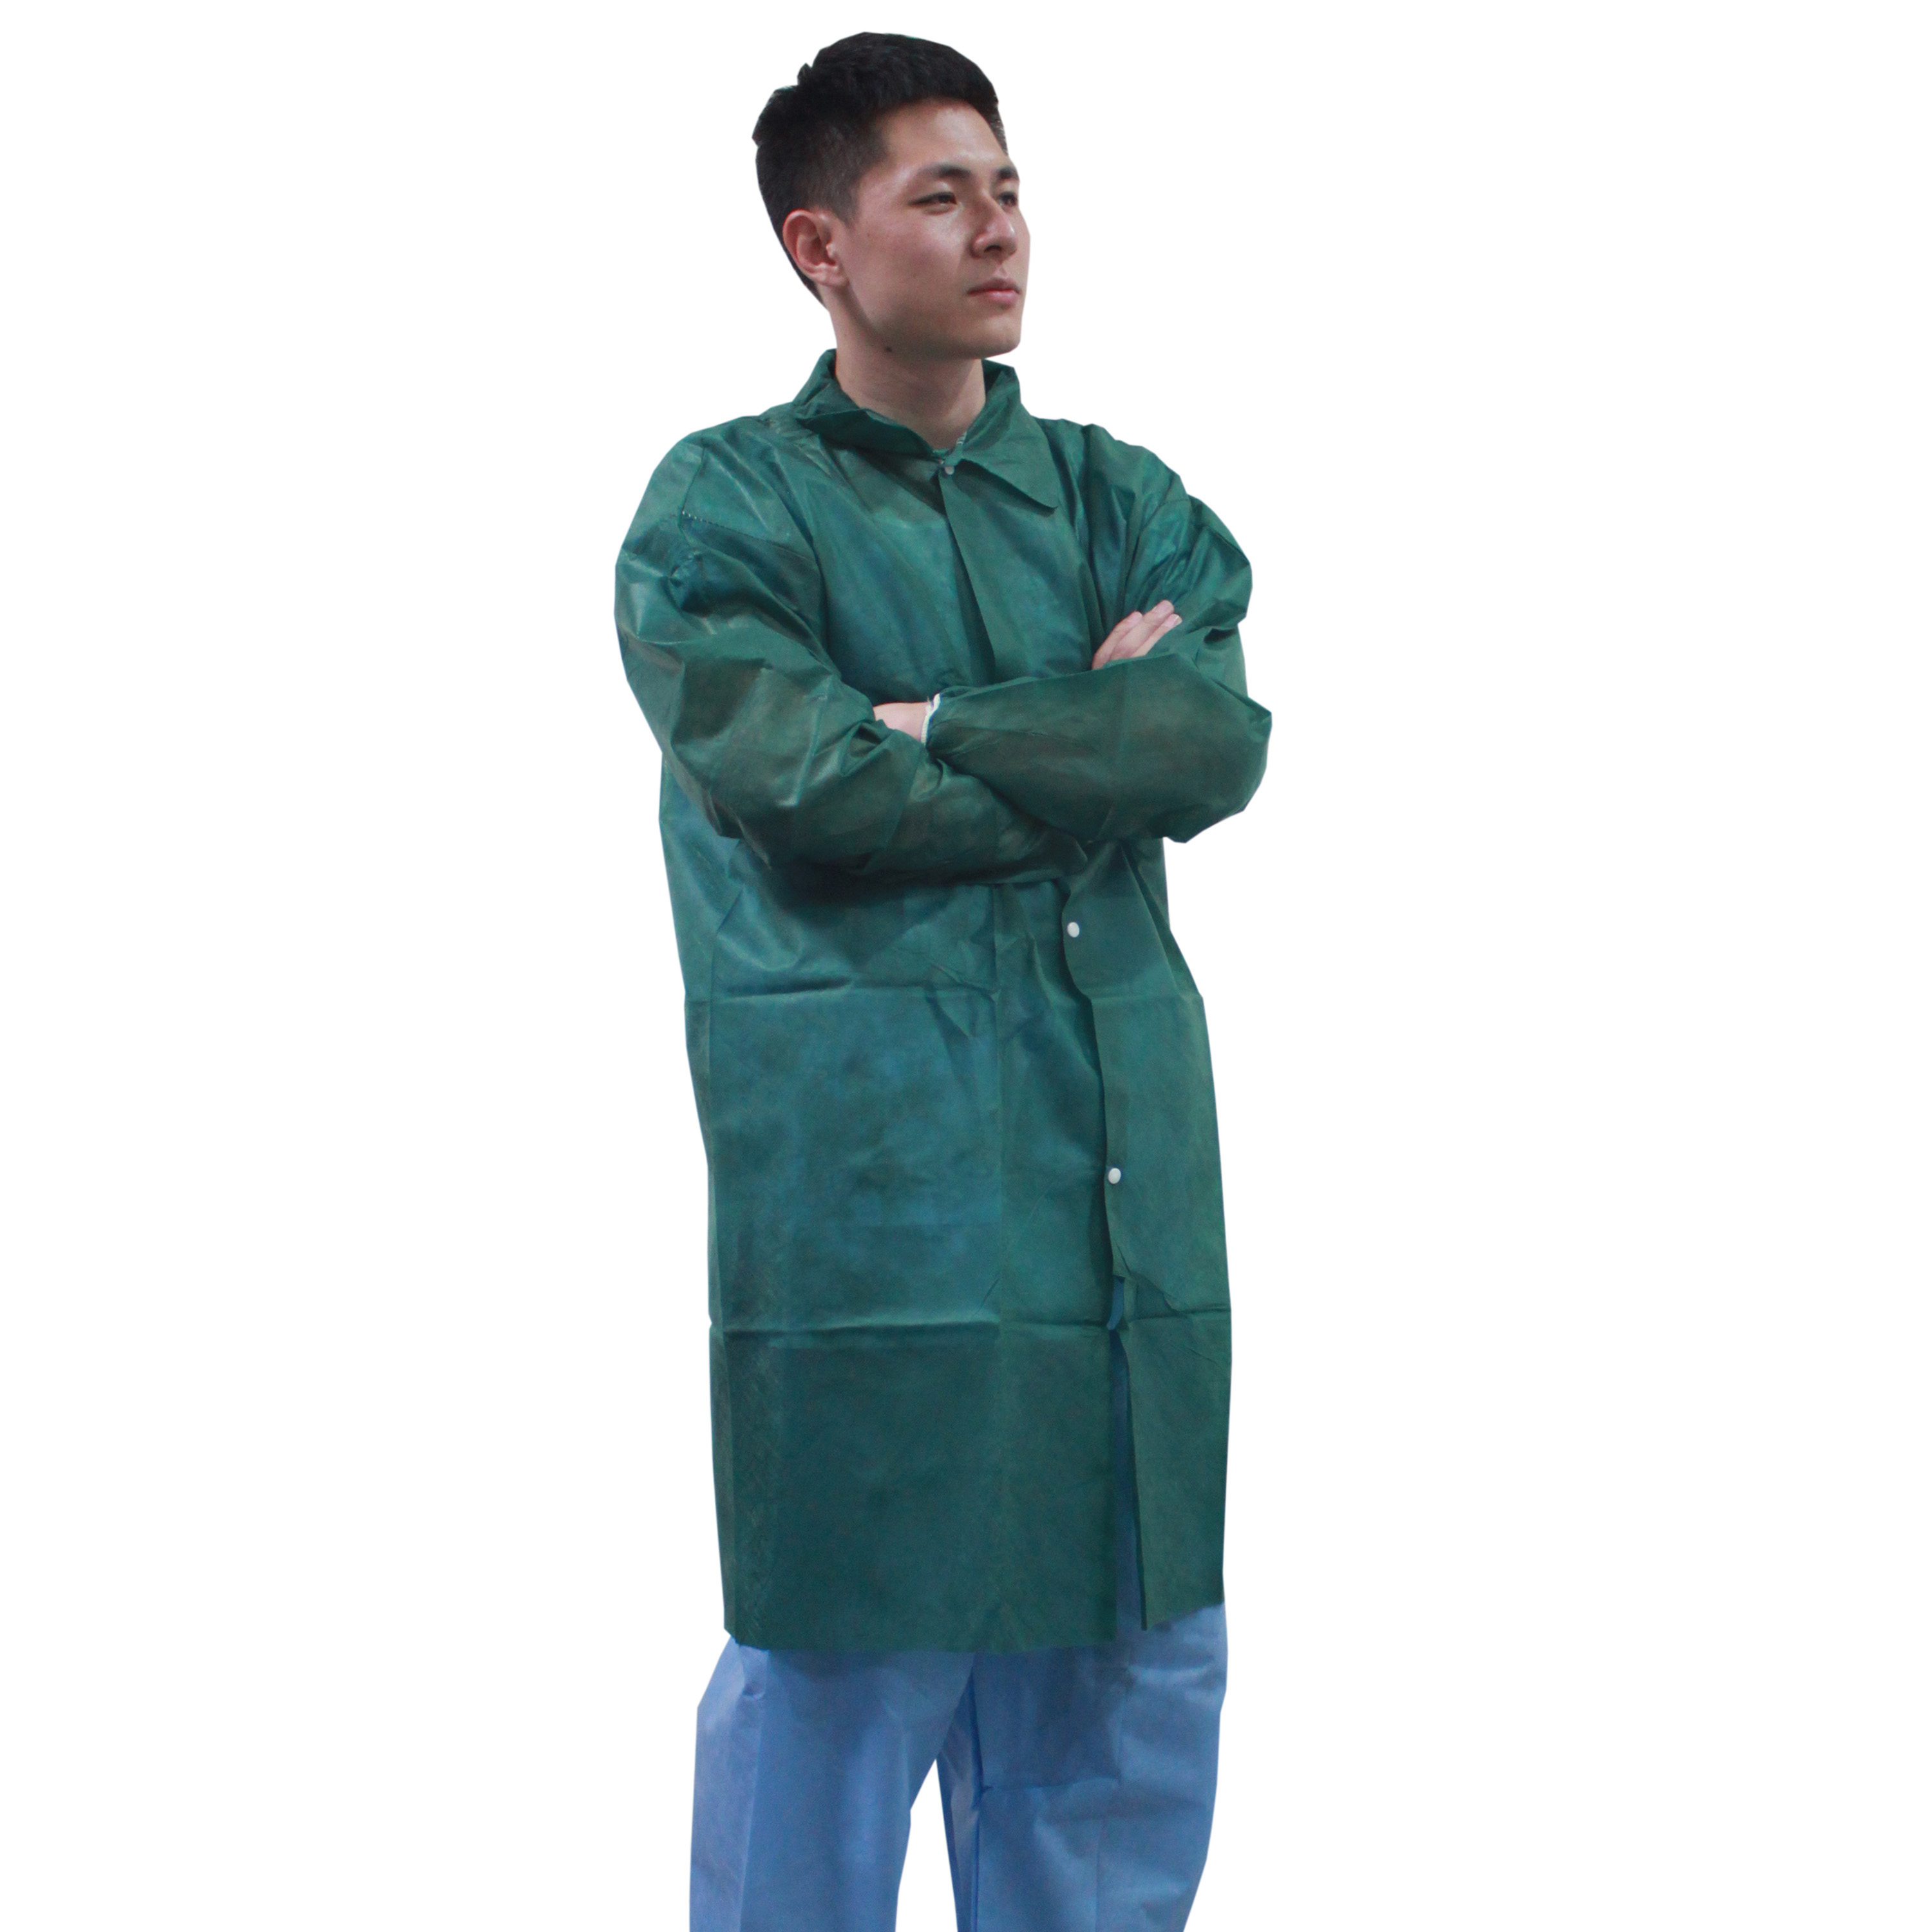 Disposable PP lab coat with snaps